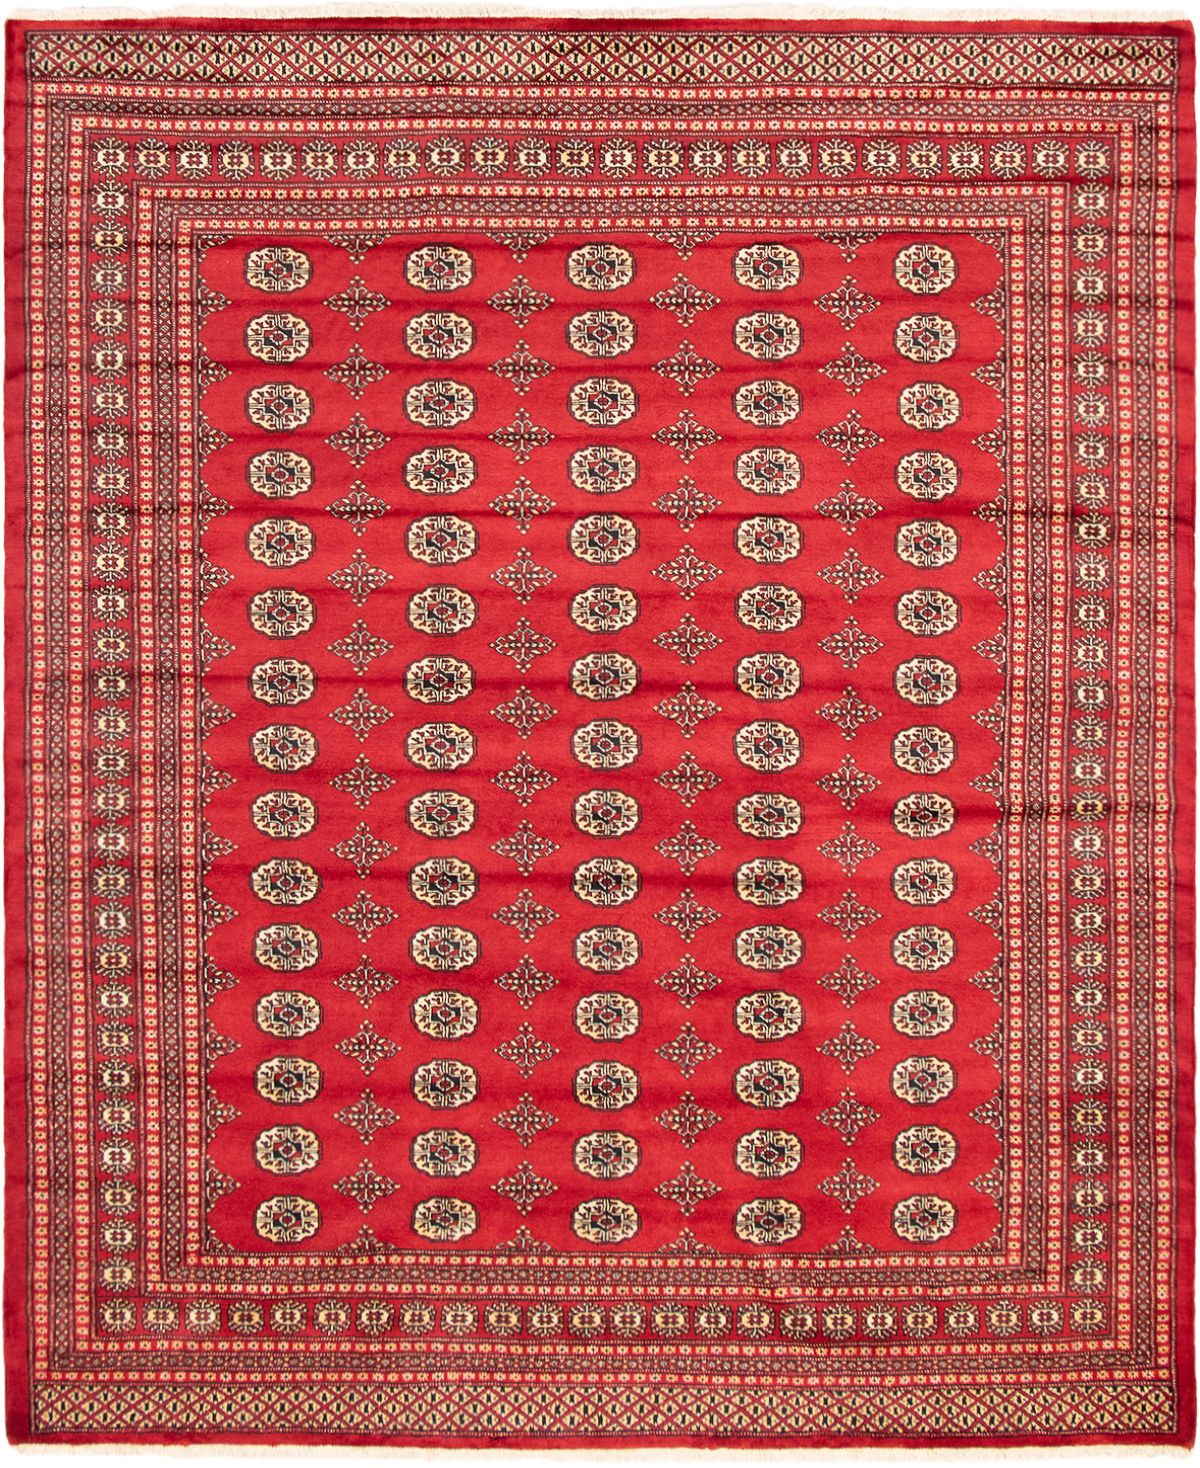 Hand-knotted Finest Peshawar Bokhara Red Wool Rug 8'2" x 9'10" Size: 8'2" x 9'10"  